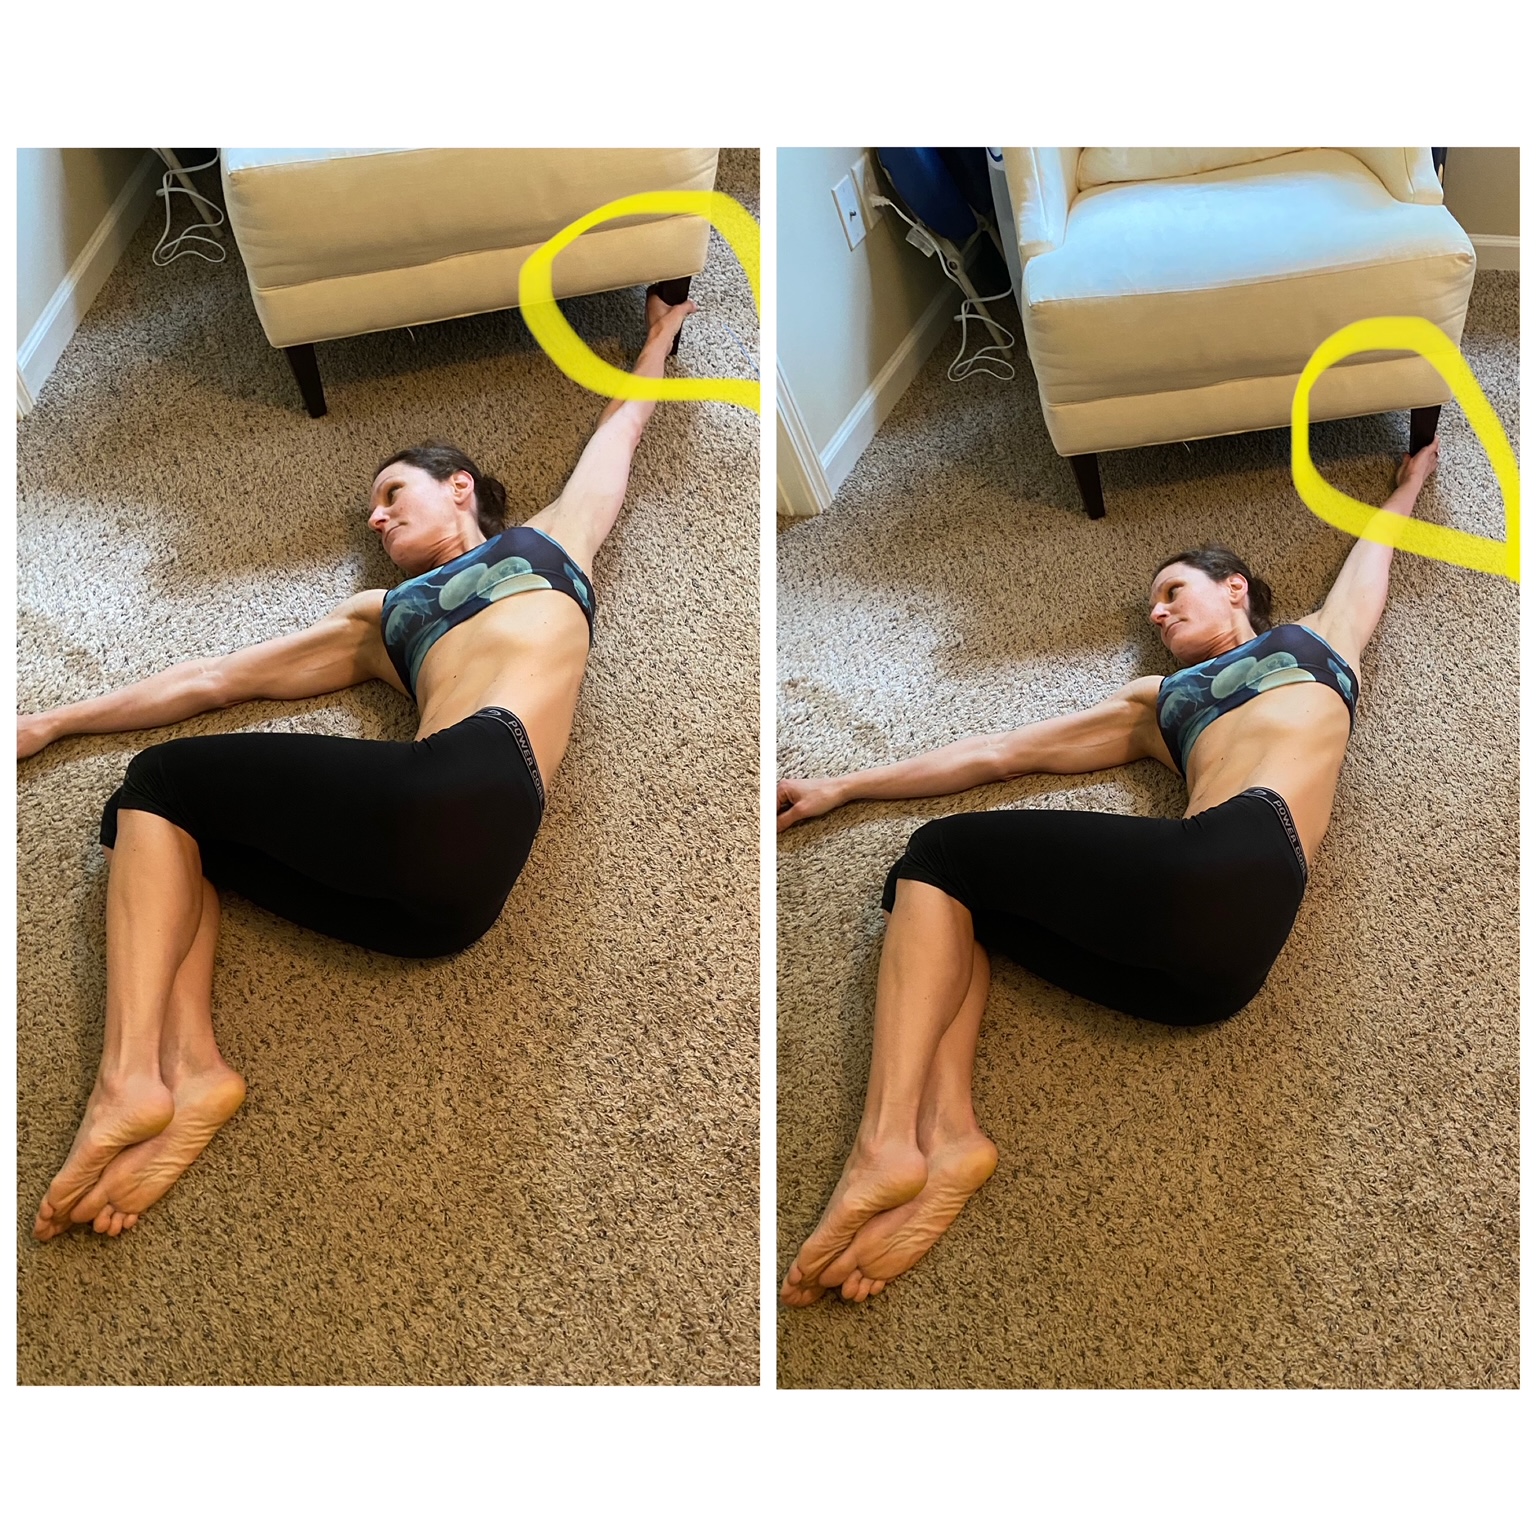 https://energymemphis.com/wp-content/uploads/2021/04/paired-chest-stretch-anchoring-arm.jpg